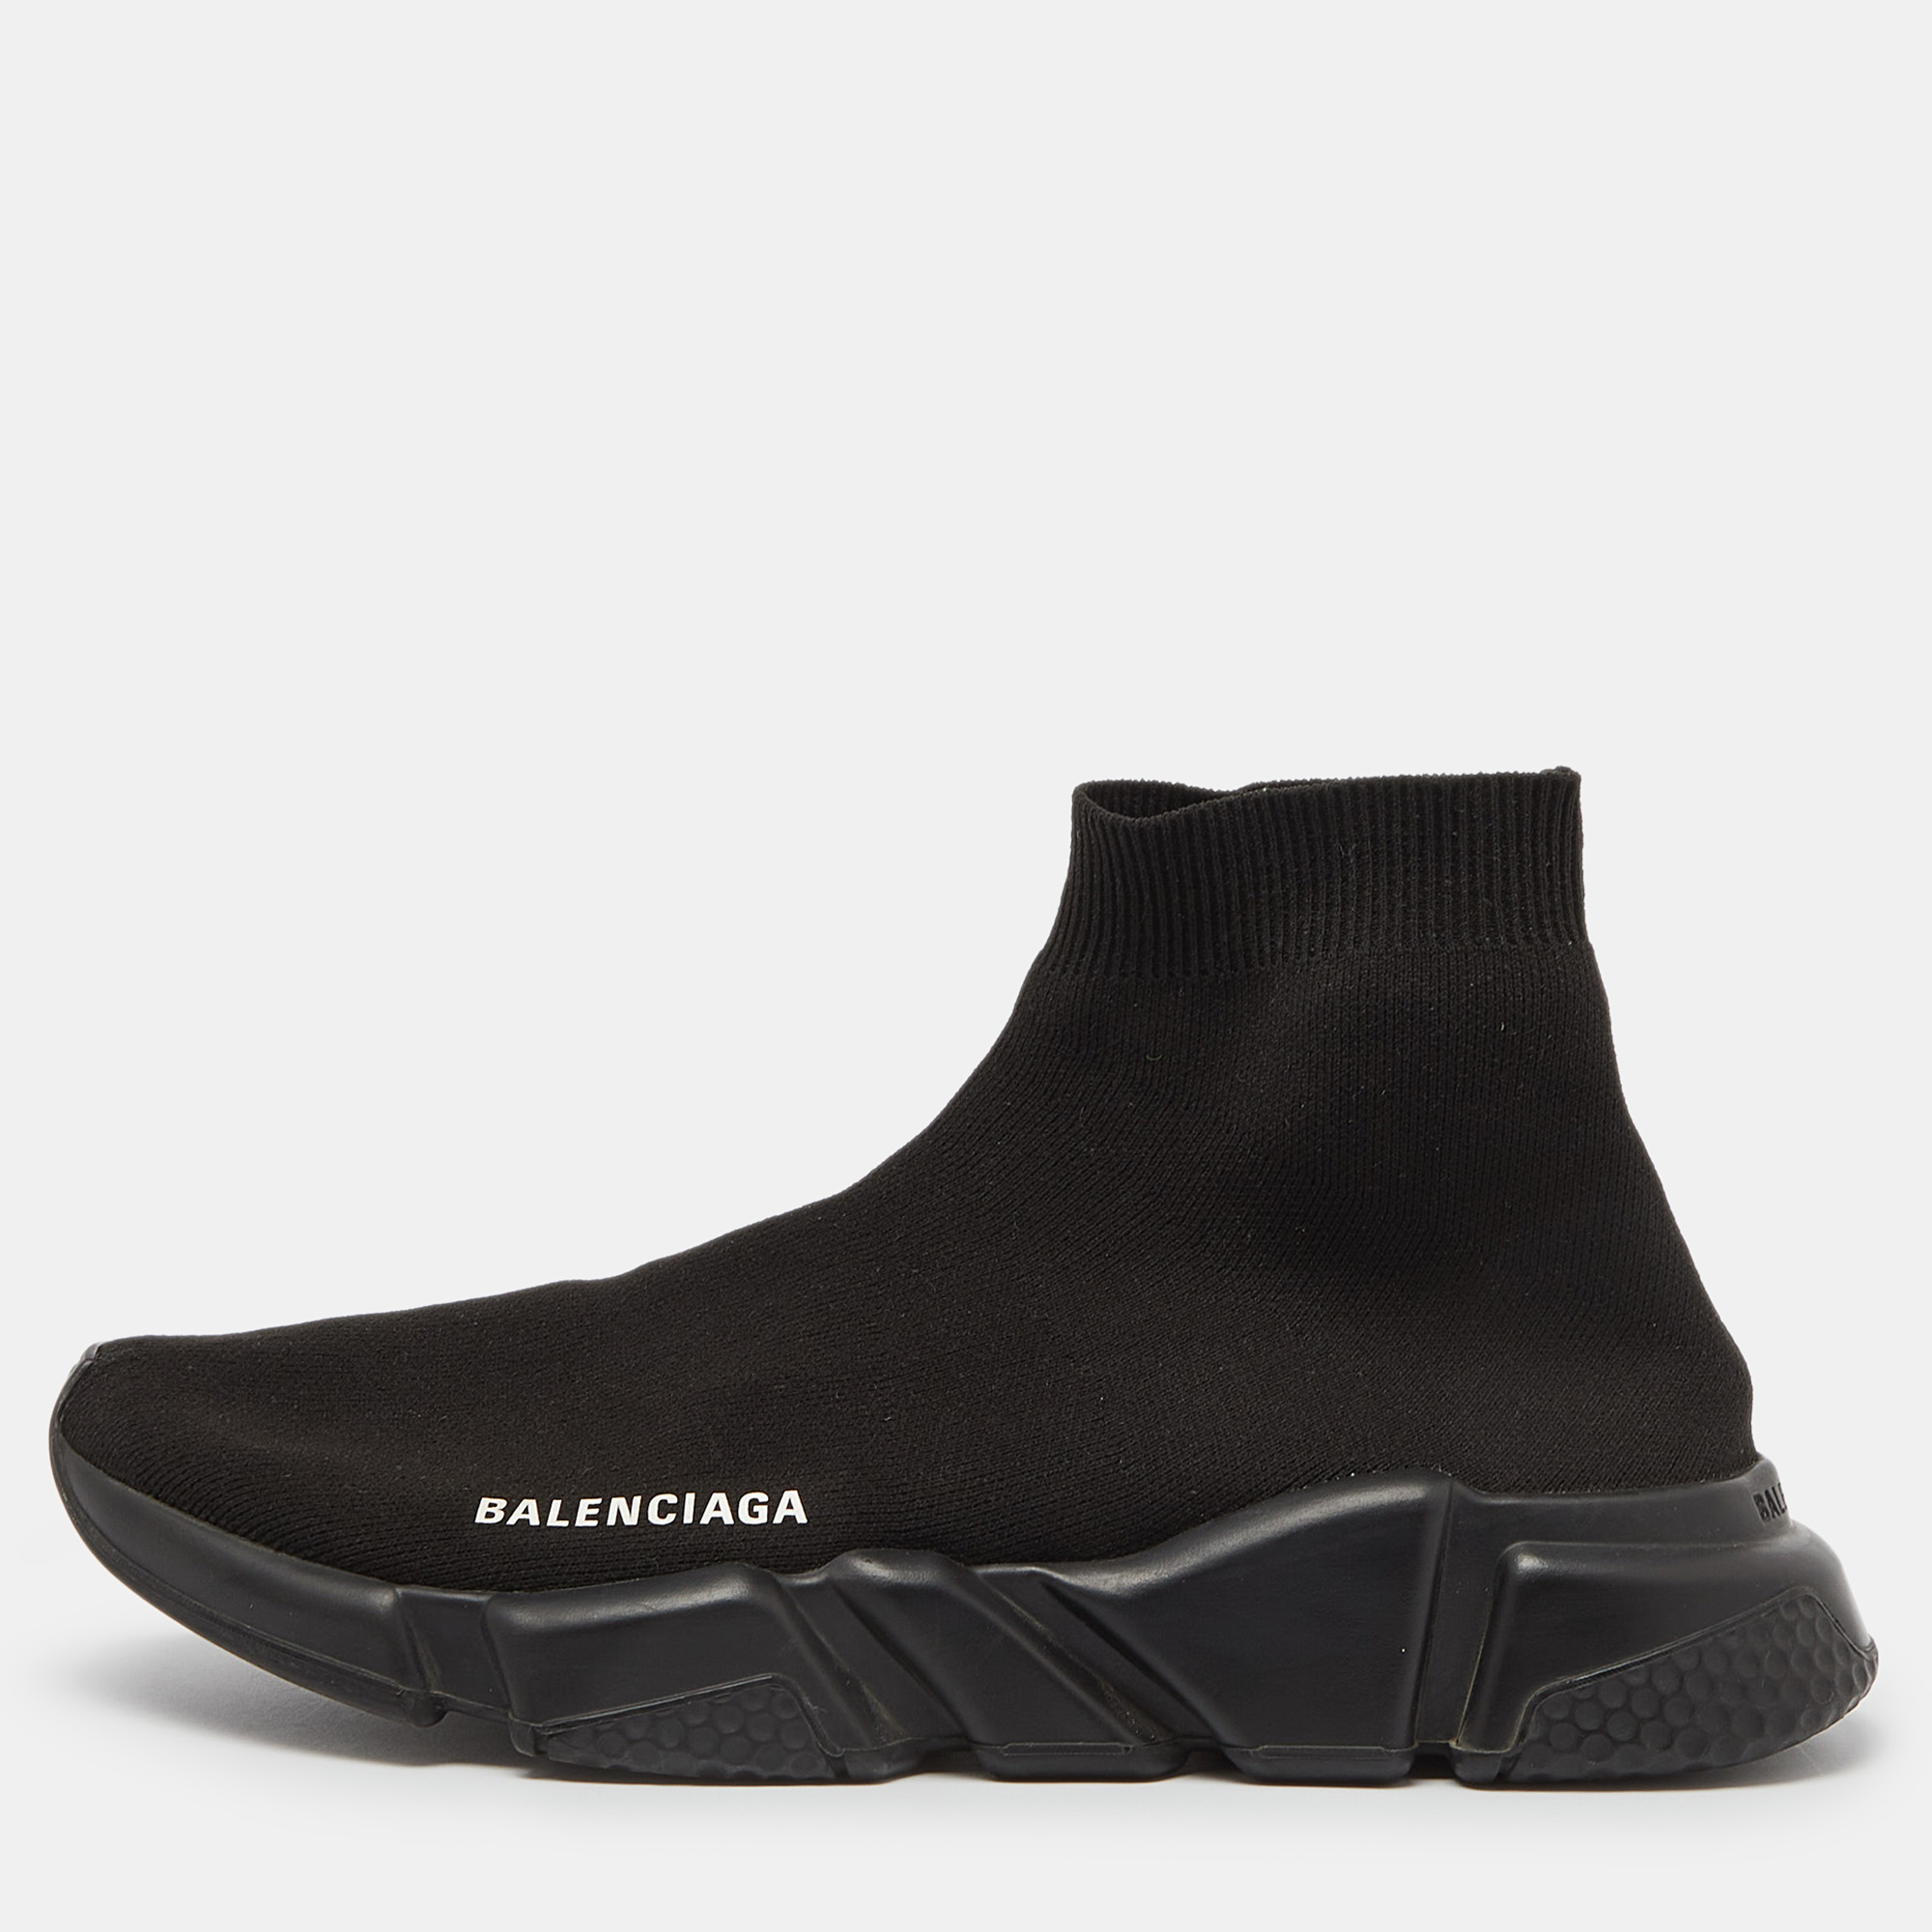 

Balenciaga Black Knit Fabric Speed Trainer High Top Sneakers Size 40